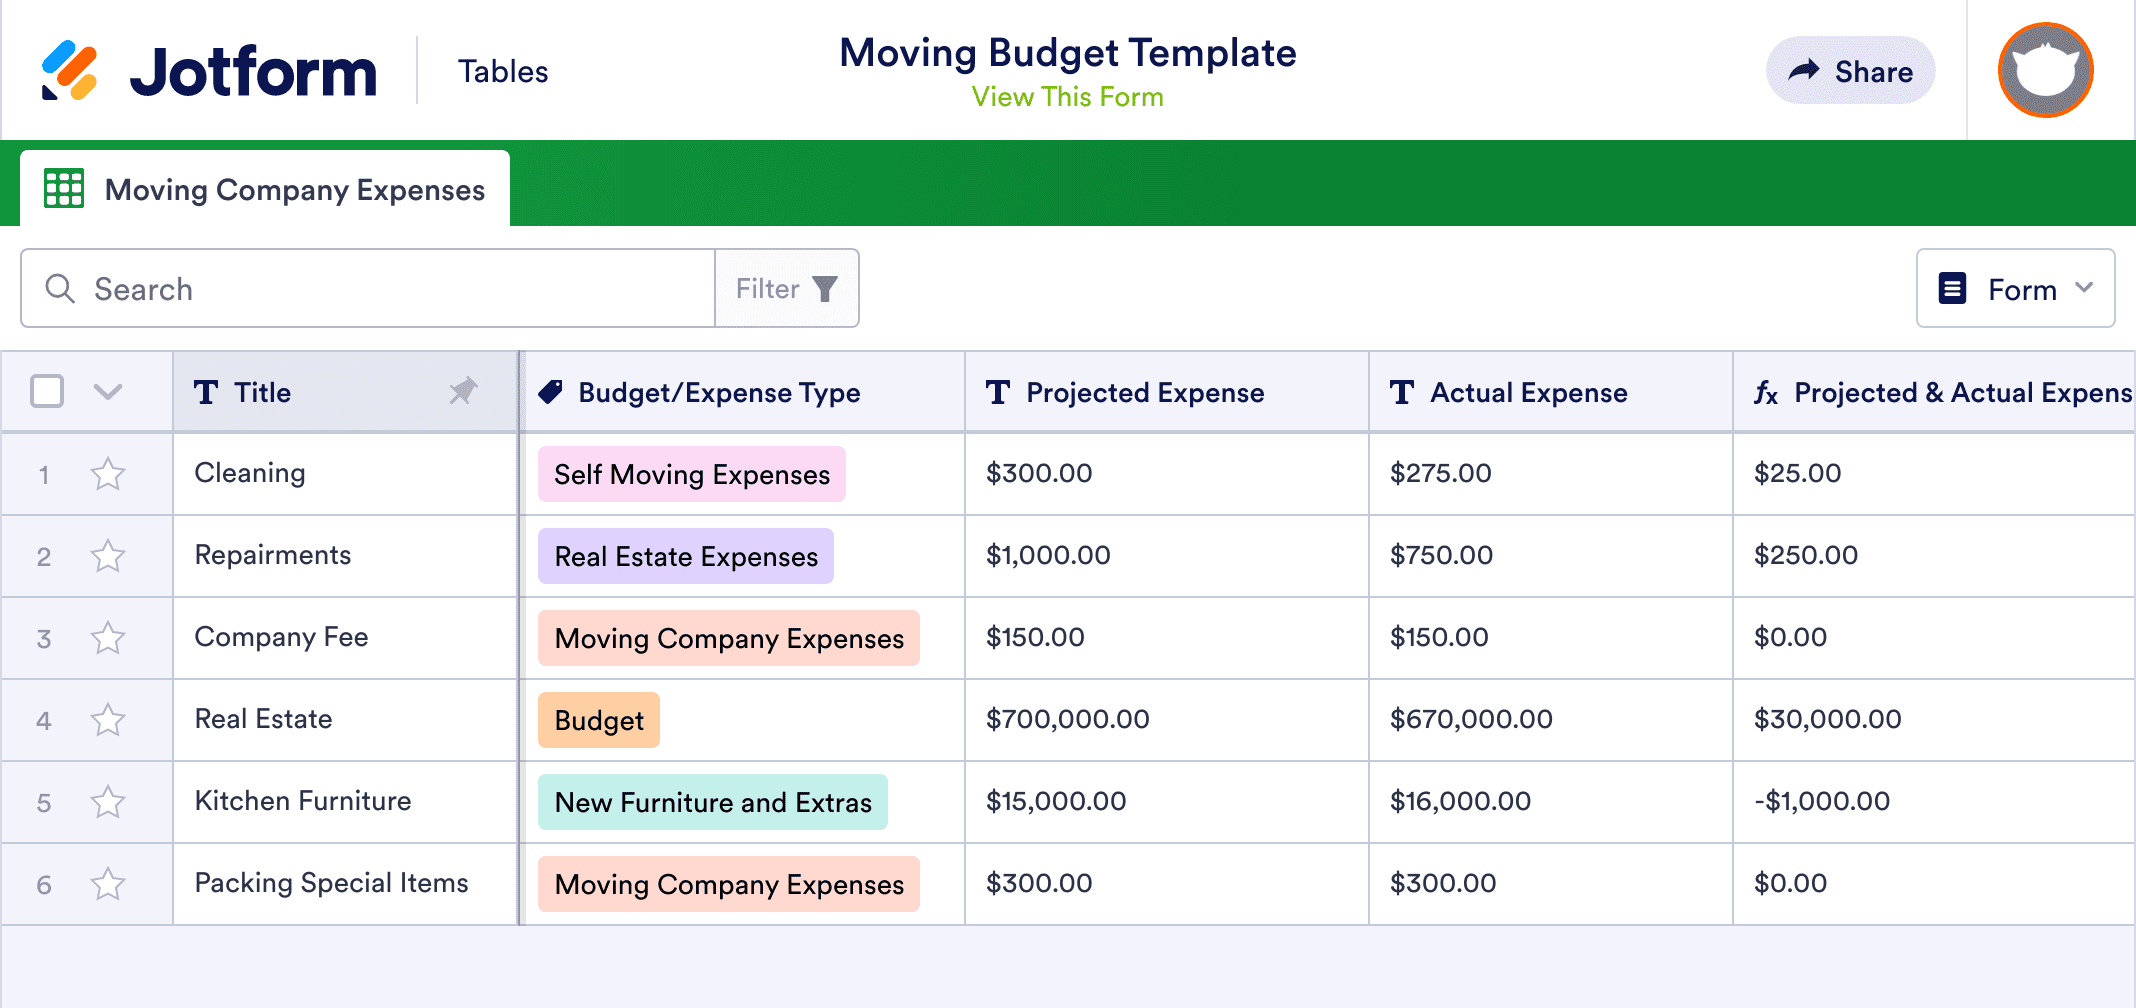 Moving Budget Template Jotform Tables